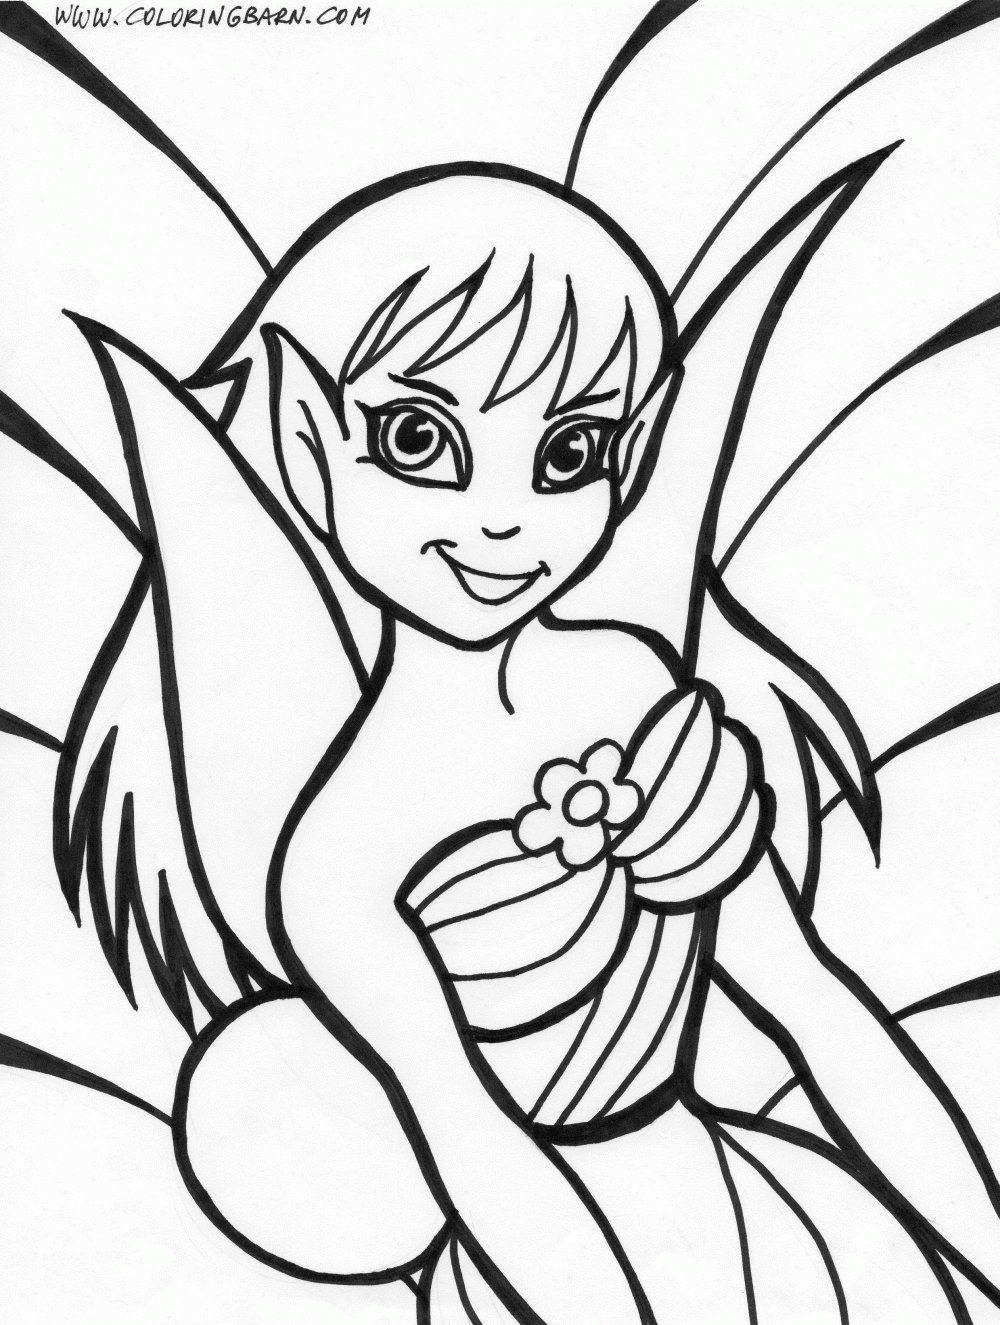 smalltalkwitht-download-coloring-pages-fairies-png